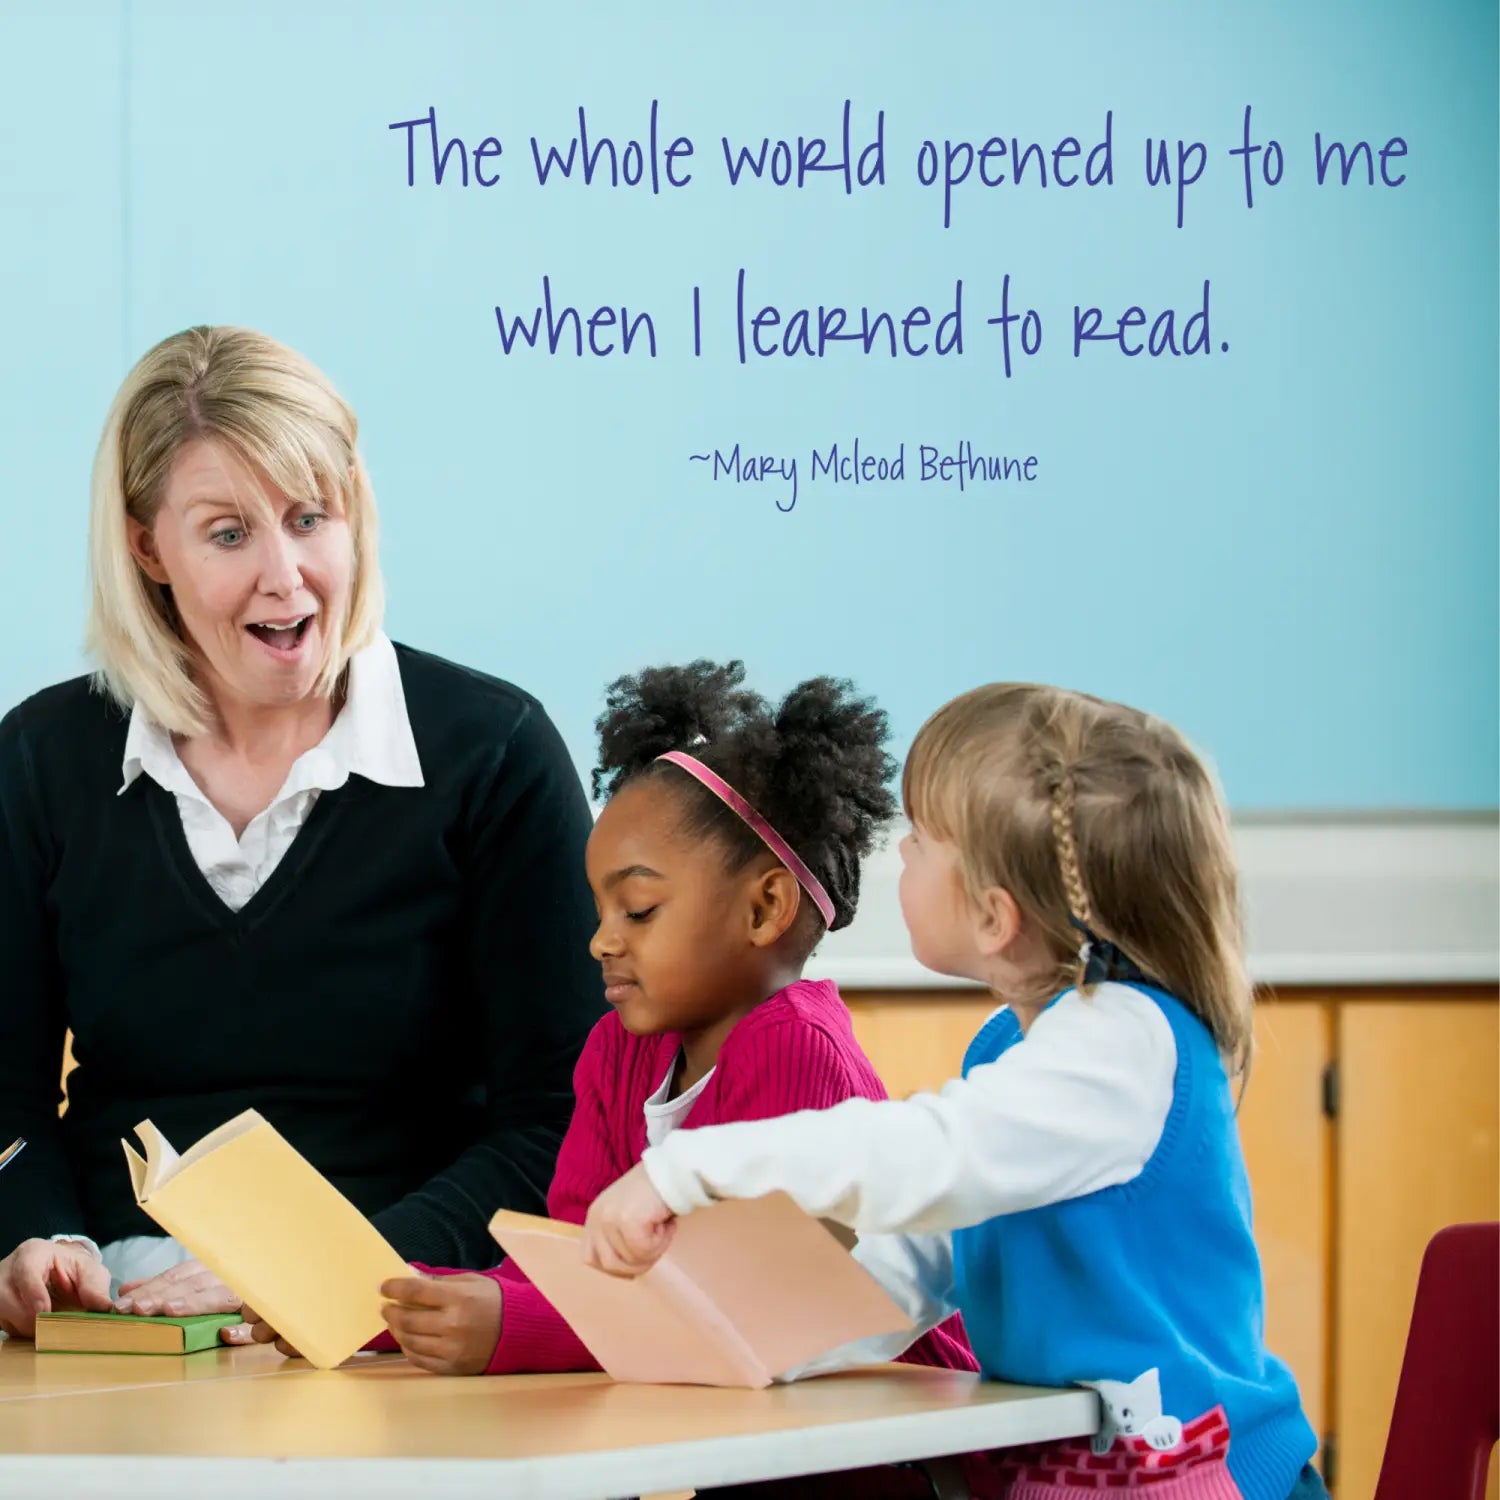 Teacher reading to students with a Simple Stencil wall decal: "The whole world opened up to me when I learned to read" displayed on library walls